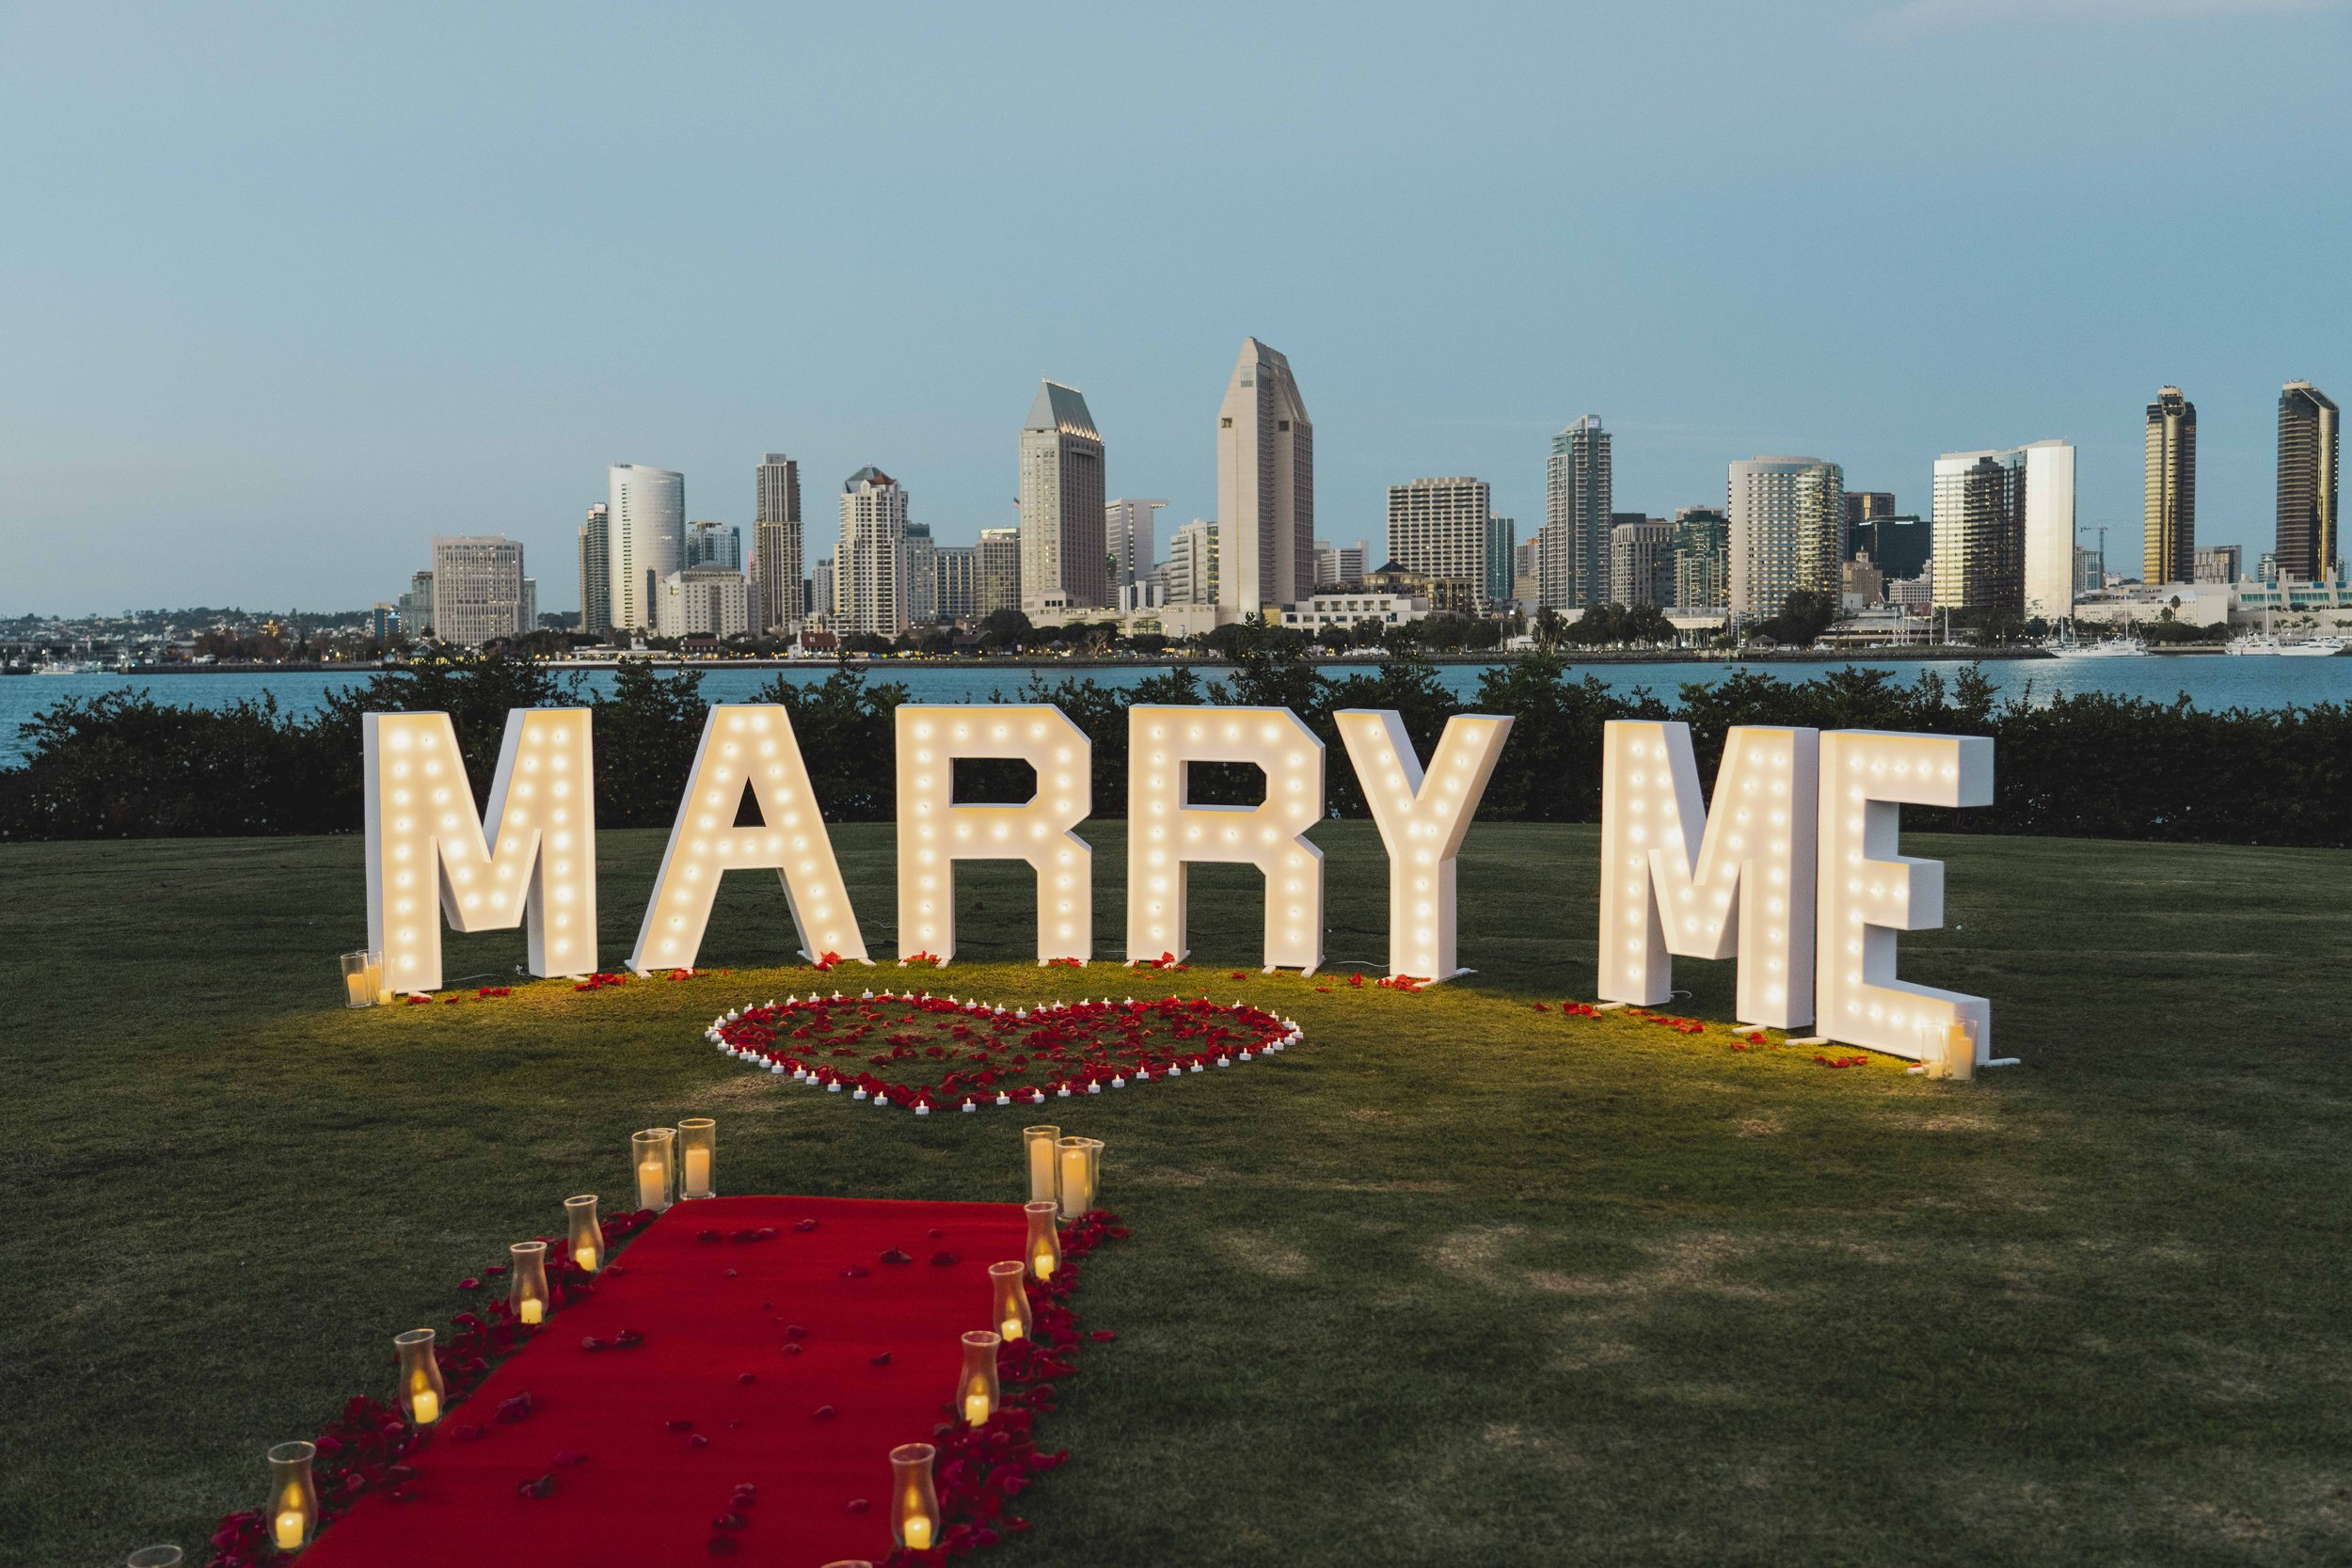 5 Reason to rent ‘Marry Me’ Light Letters for your proposal